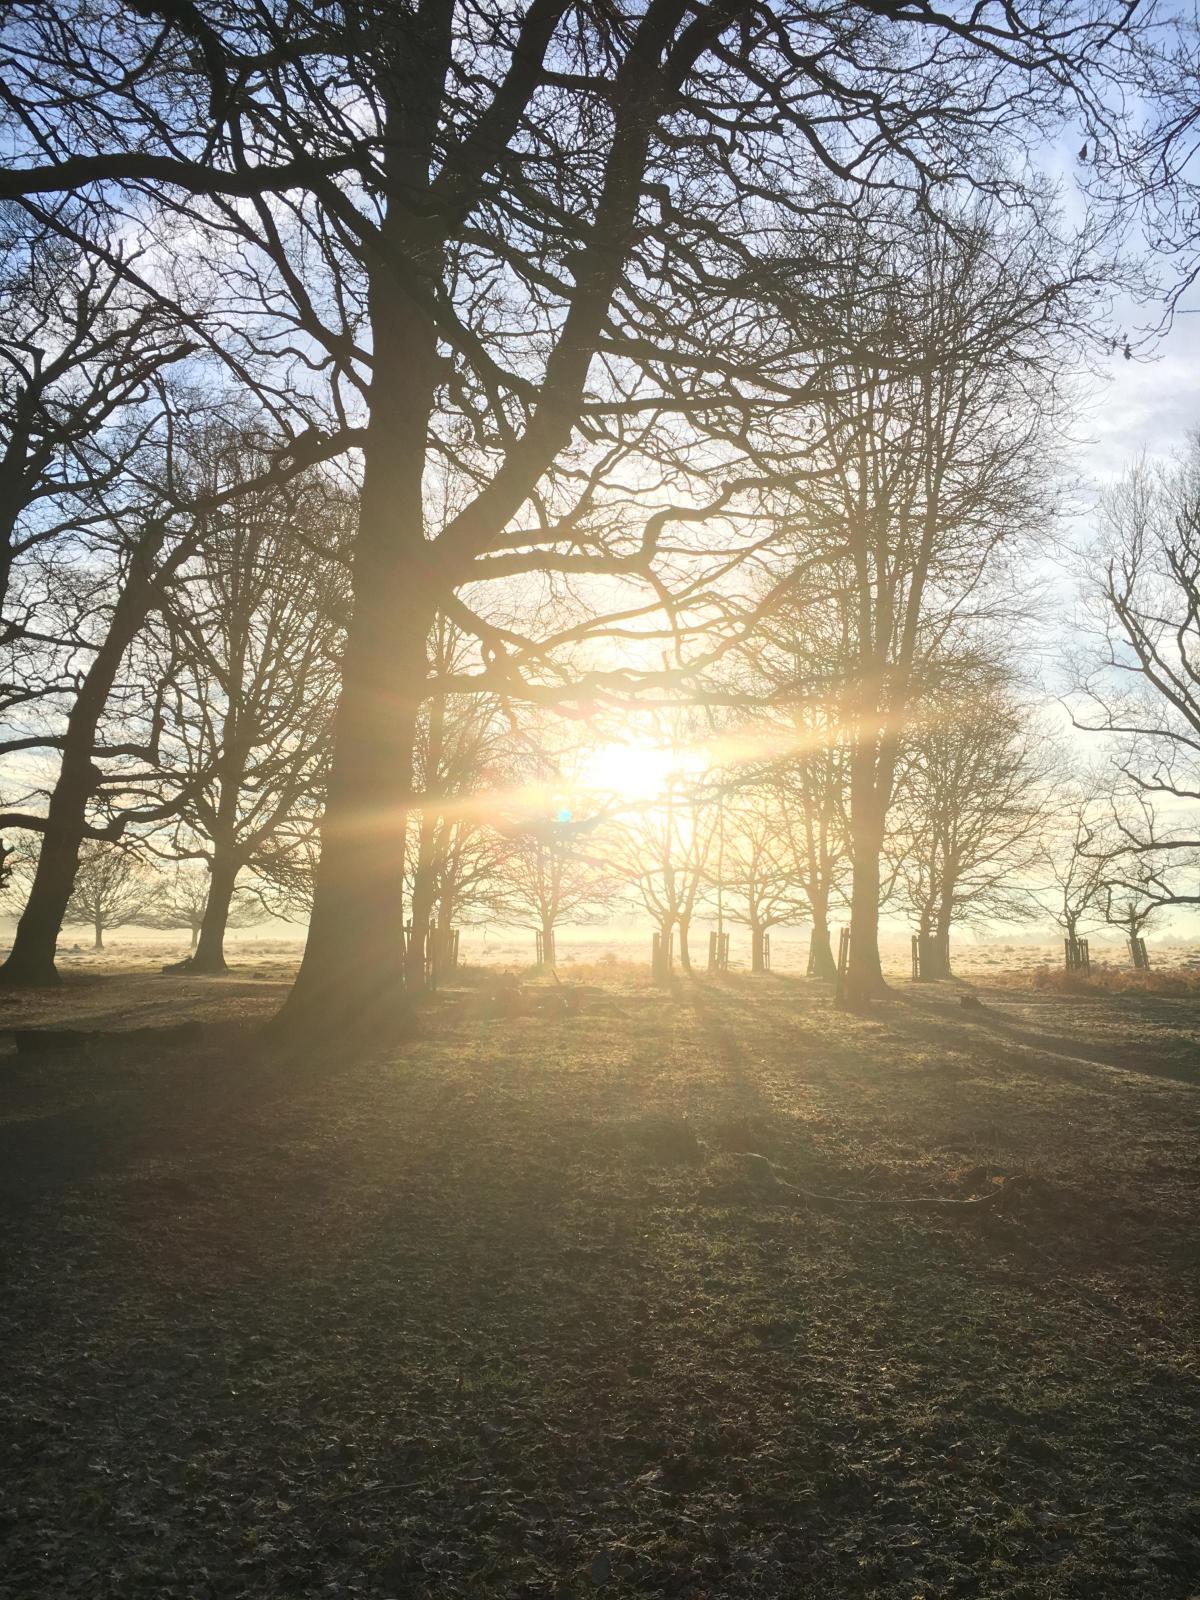 Jac Shine took this photo of a beautiful Richmond Park on a cold frosty morning on January 20.